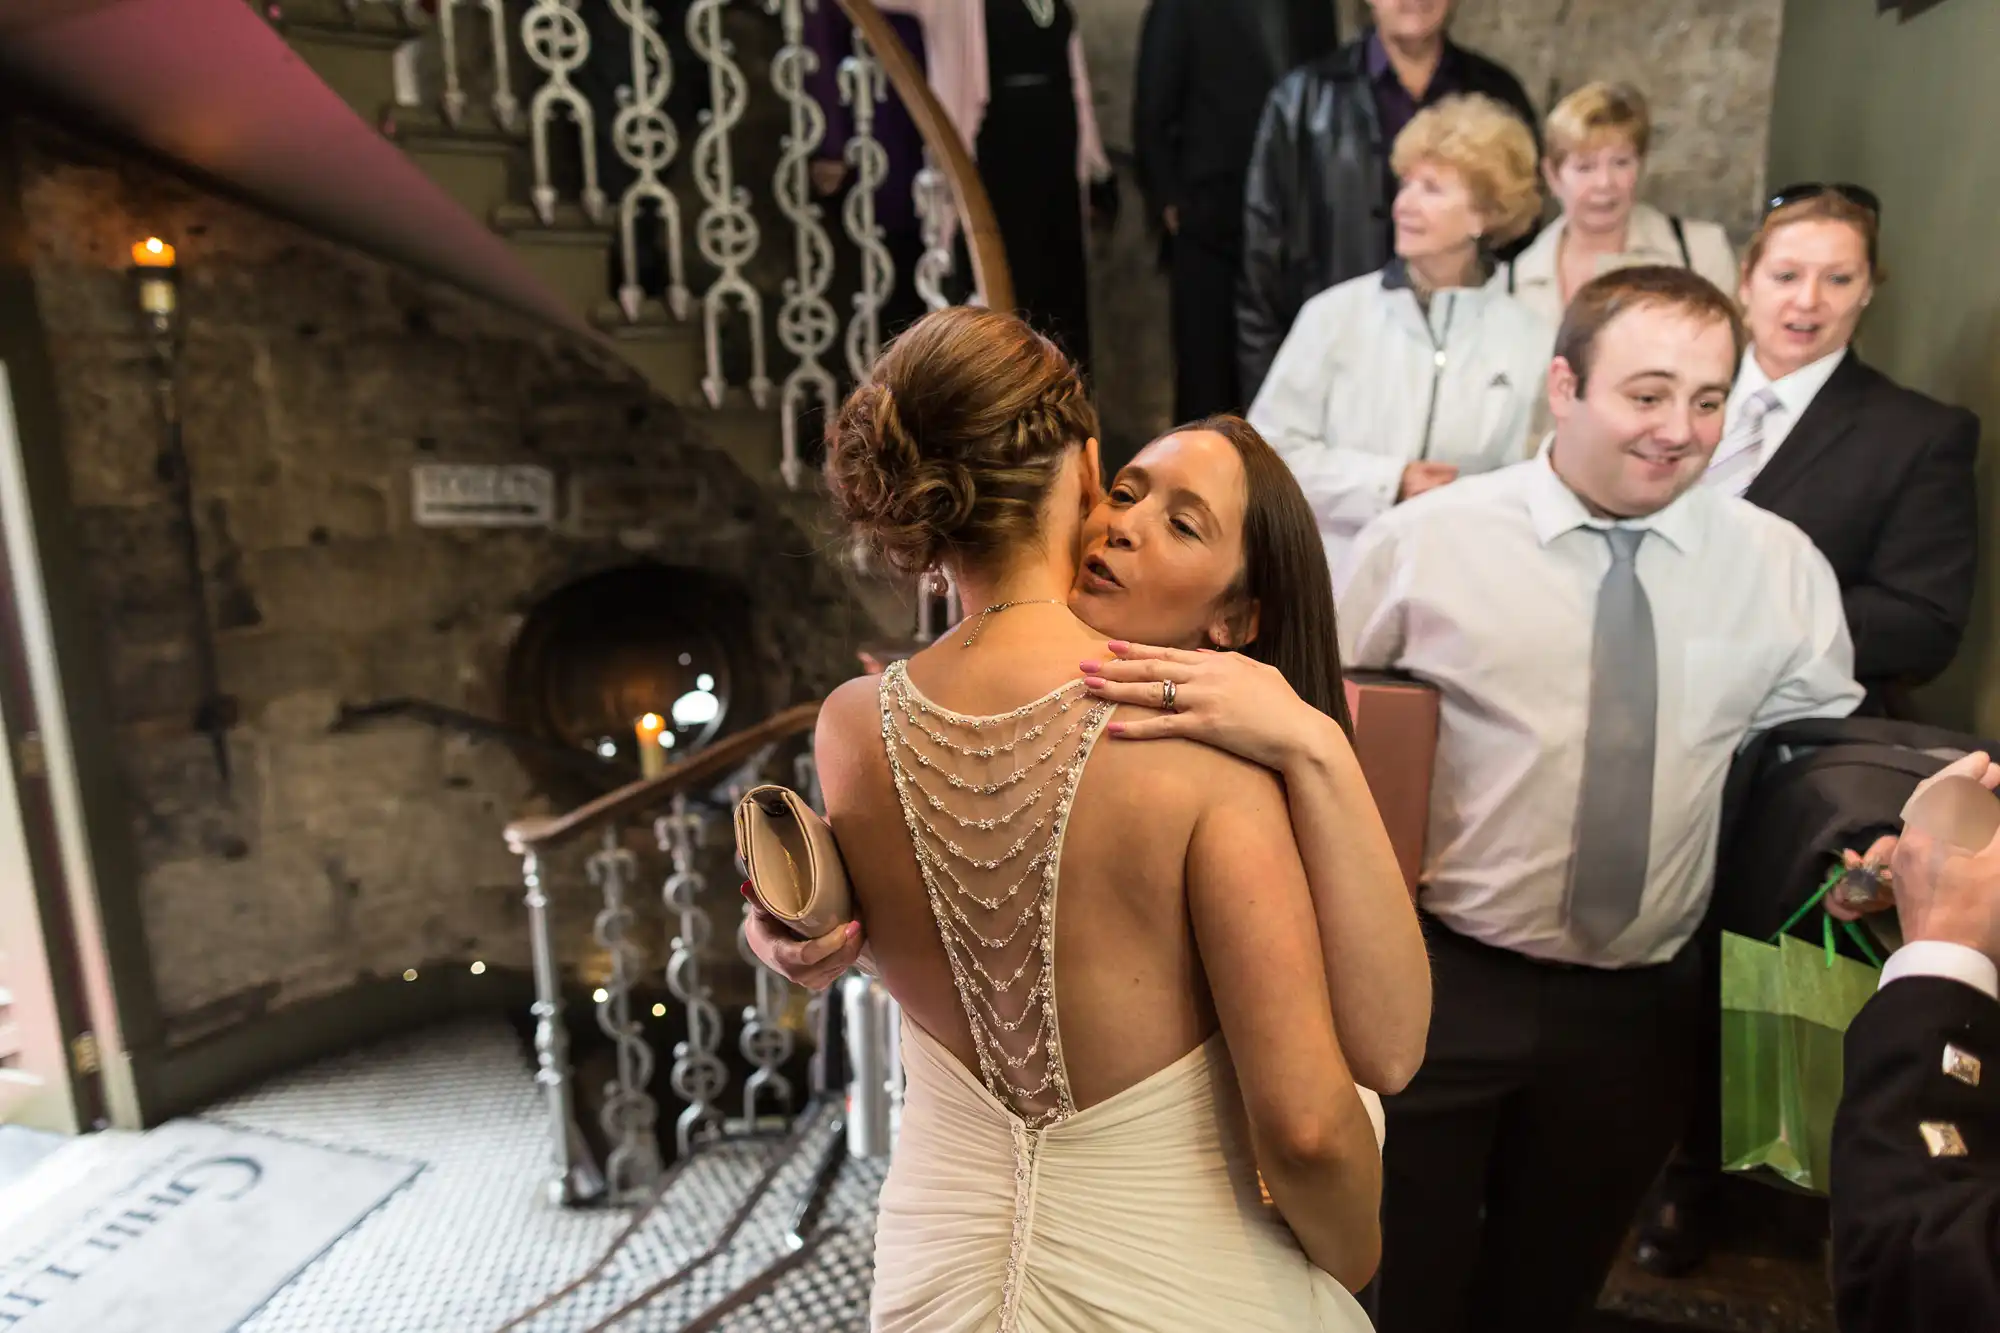 A bride in a backless dress embraces a woman at a wedding, surrounded by guests watching and smiling.